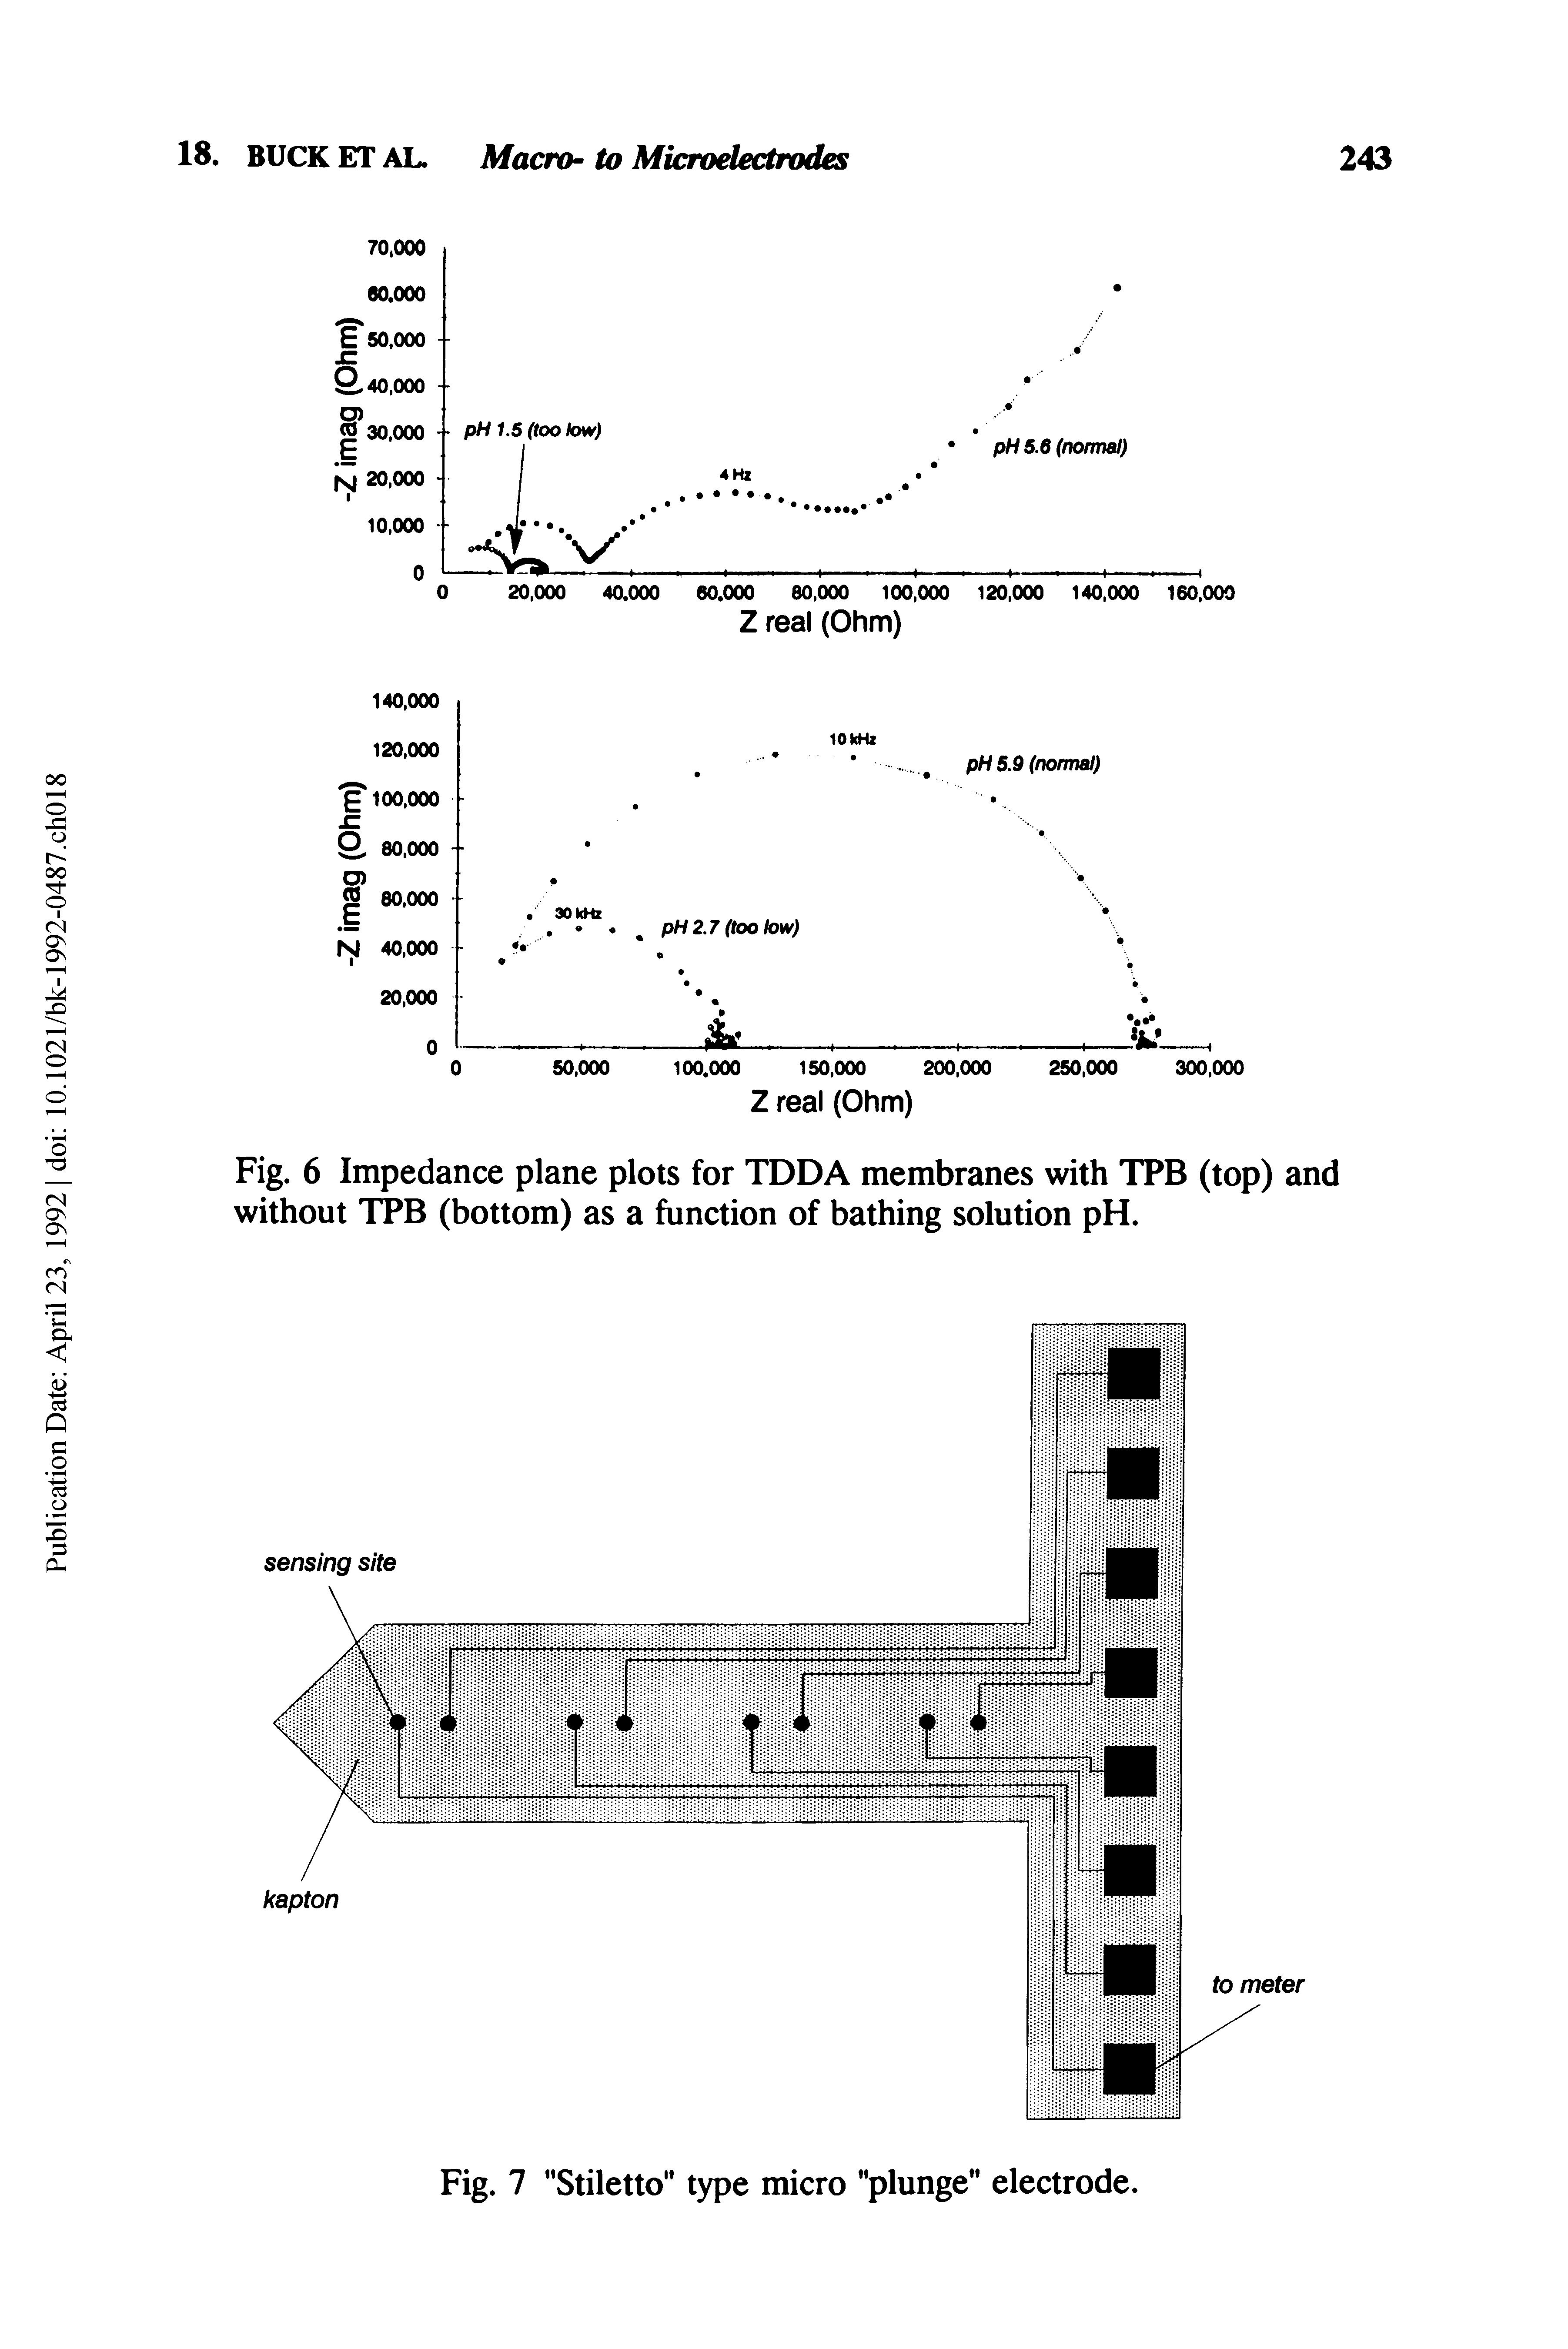 Fig. 6 Impedance plane plots for TDDA membranes with TPB (top) and without TPB (bottom) as a function of bathing solution pH.